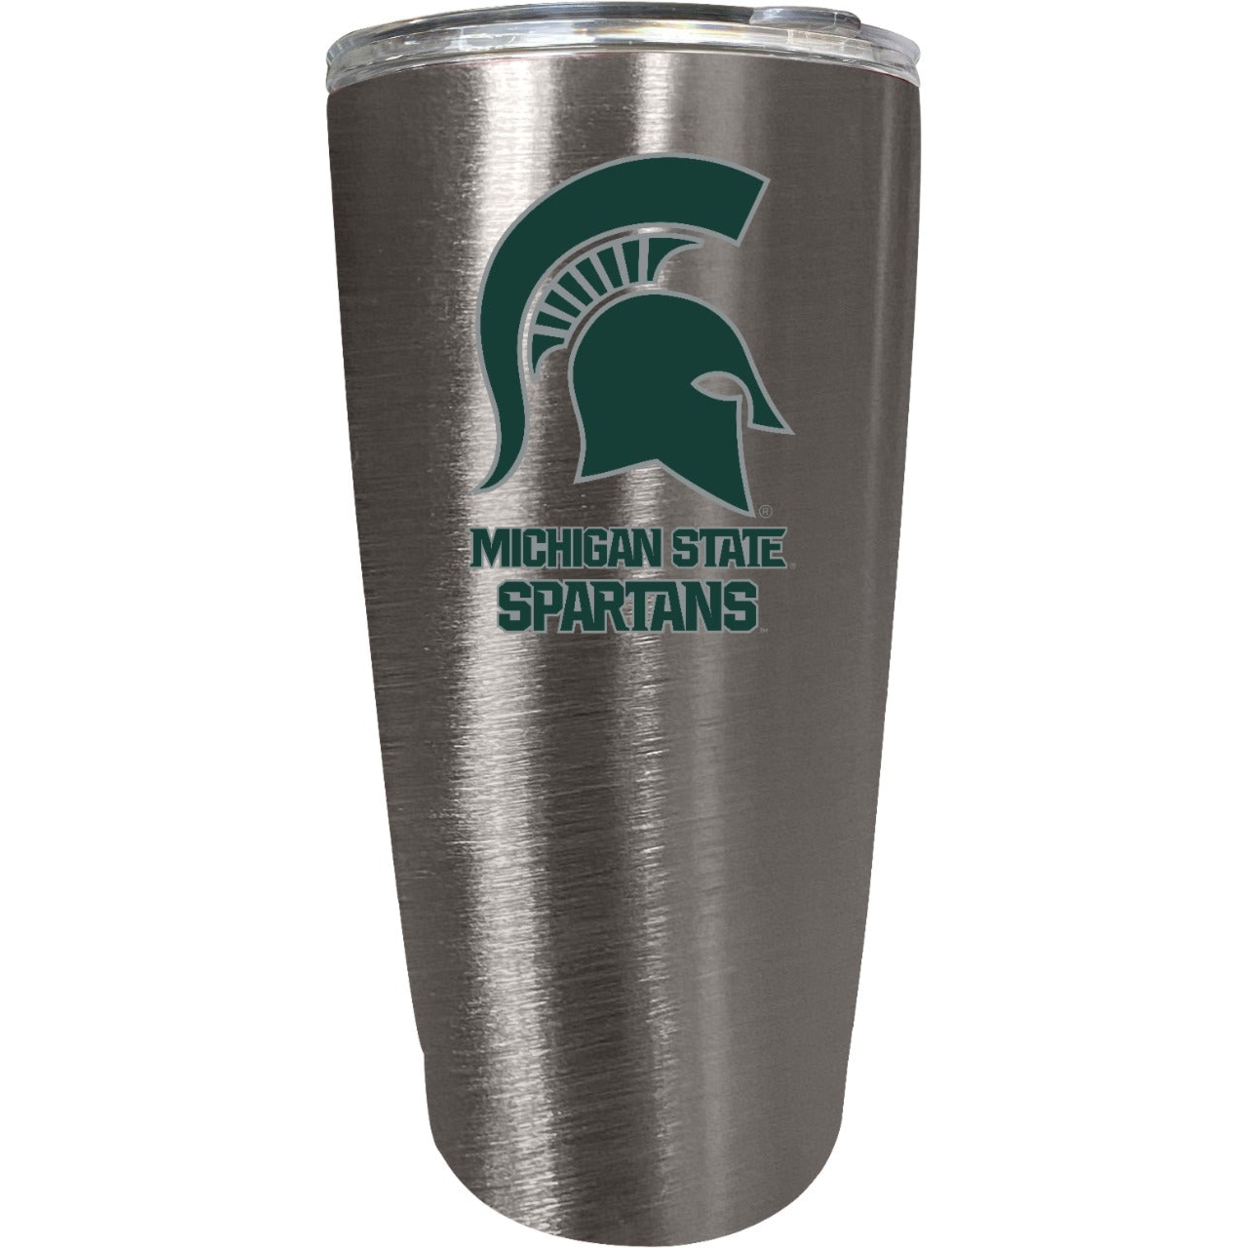 Michigan State Spartans 16 Oz Insulated Stainless Steel Tumbler Colorless